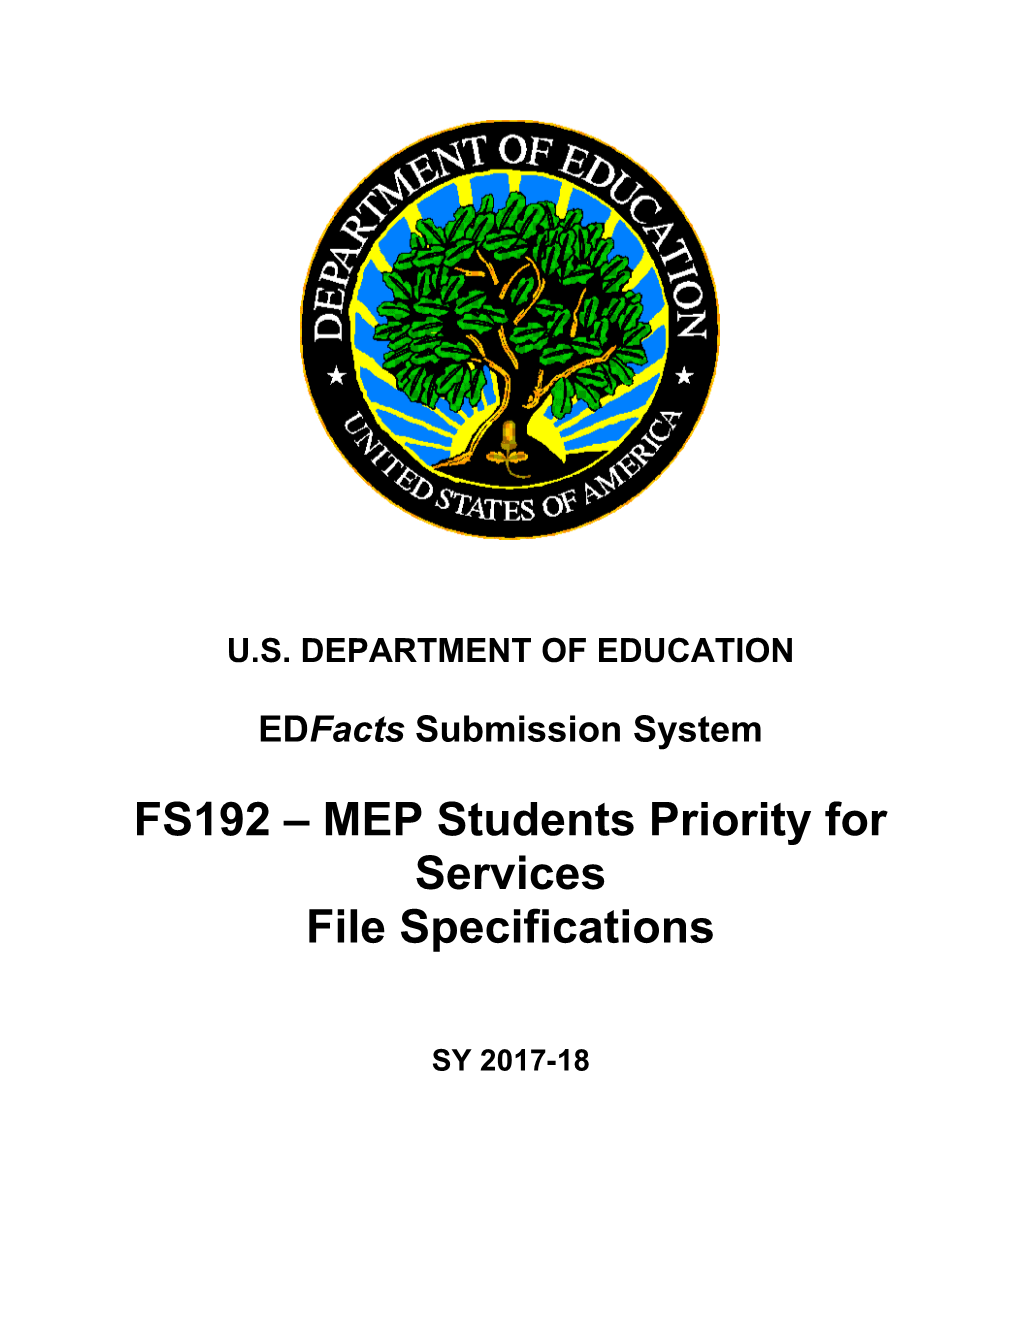 FS192 MEP Students Priority for Services File Specifications (Msword)